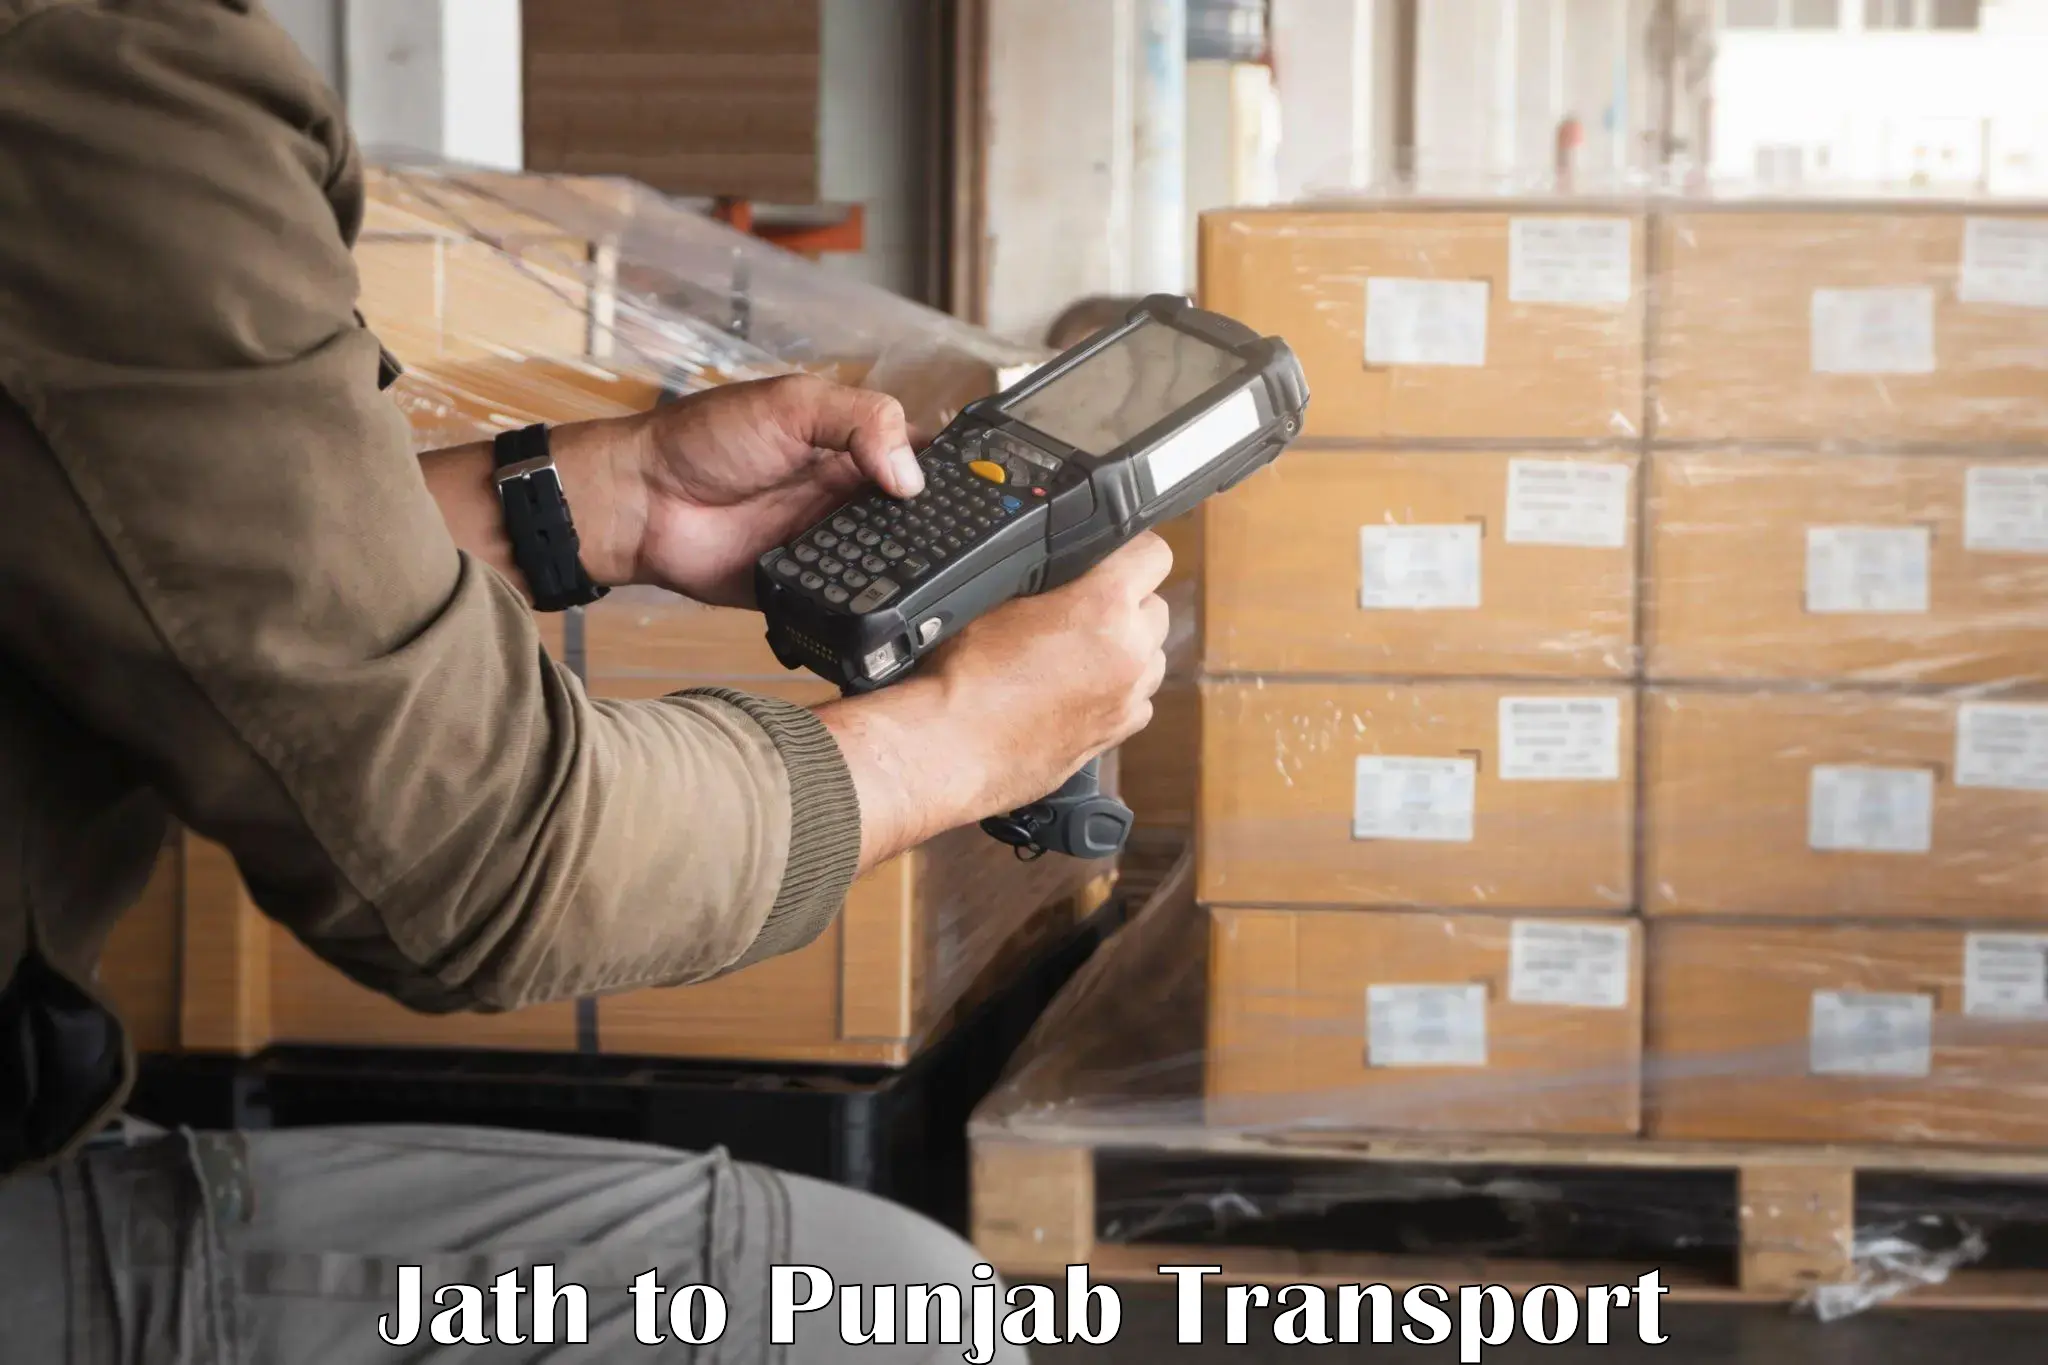 Road transport services in Jath to Patiala